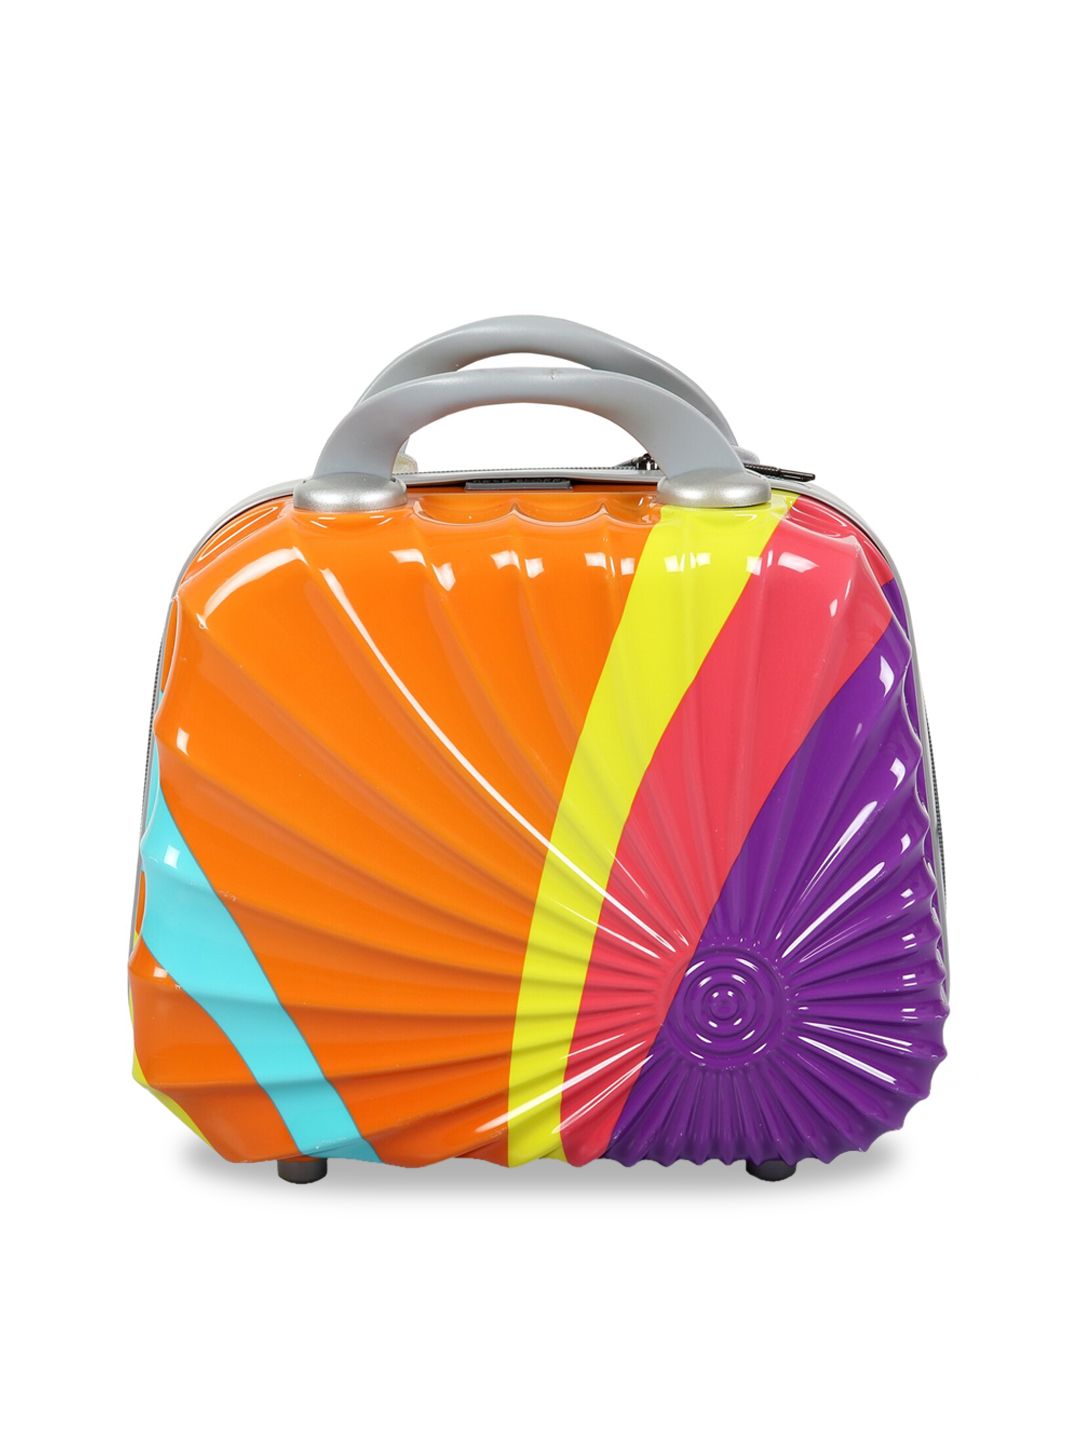 Polo Class MultiColor Travel Big Vanity Bag Price in India